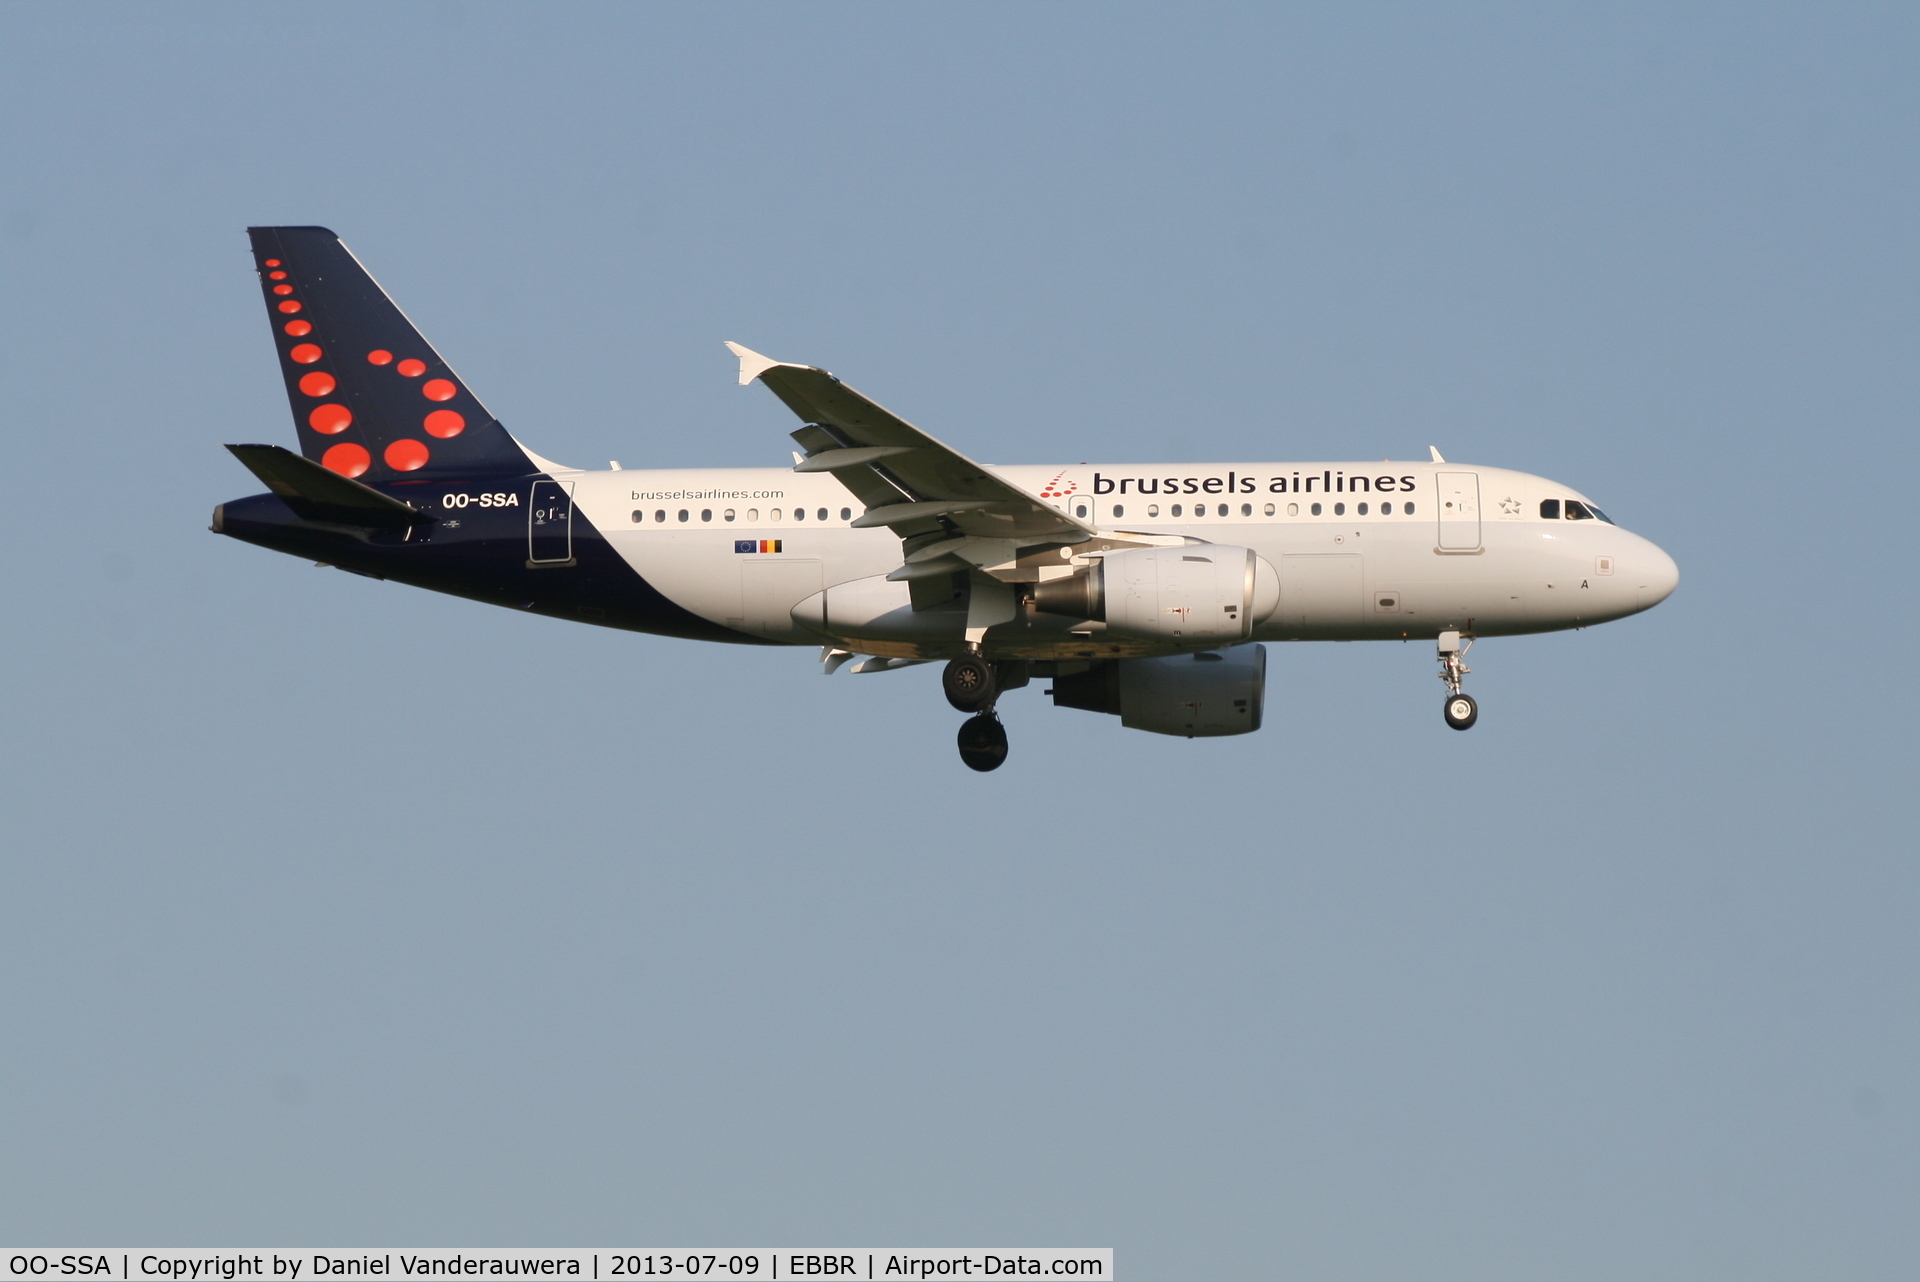 OO-SSA, 2005 Airbus A319-111 C/N 2392, Arrival of flight 2726 to RWY 02